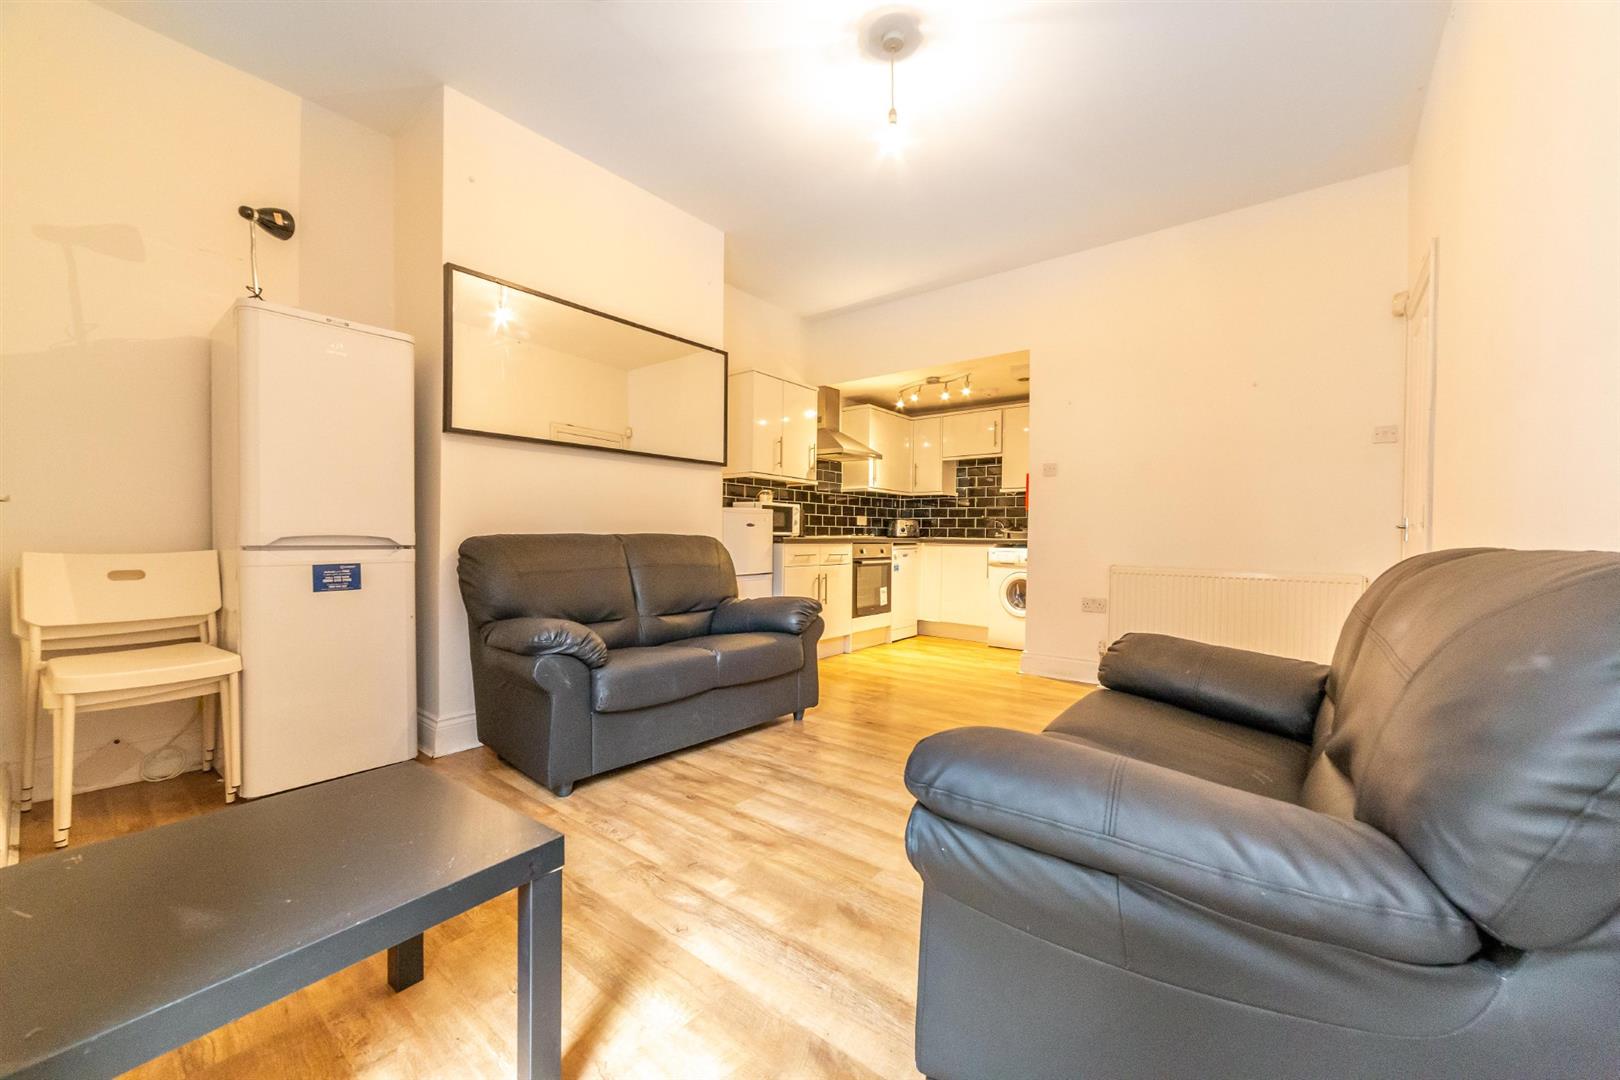 3 bed flat to rent in Greystoke Avenue, Newcastle Upon Tyne - Property Image 1